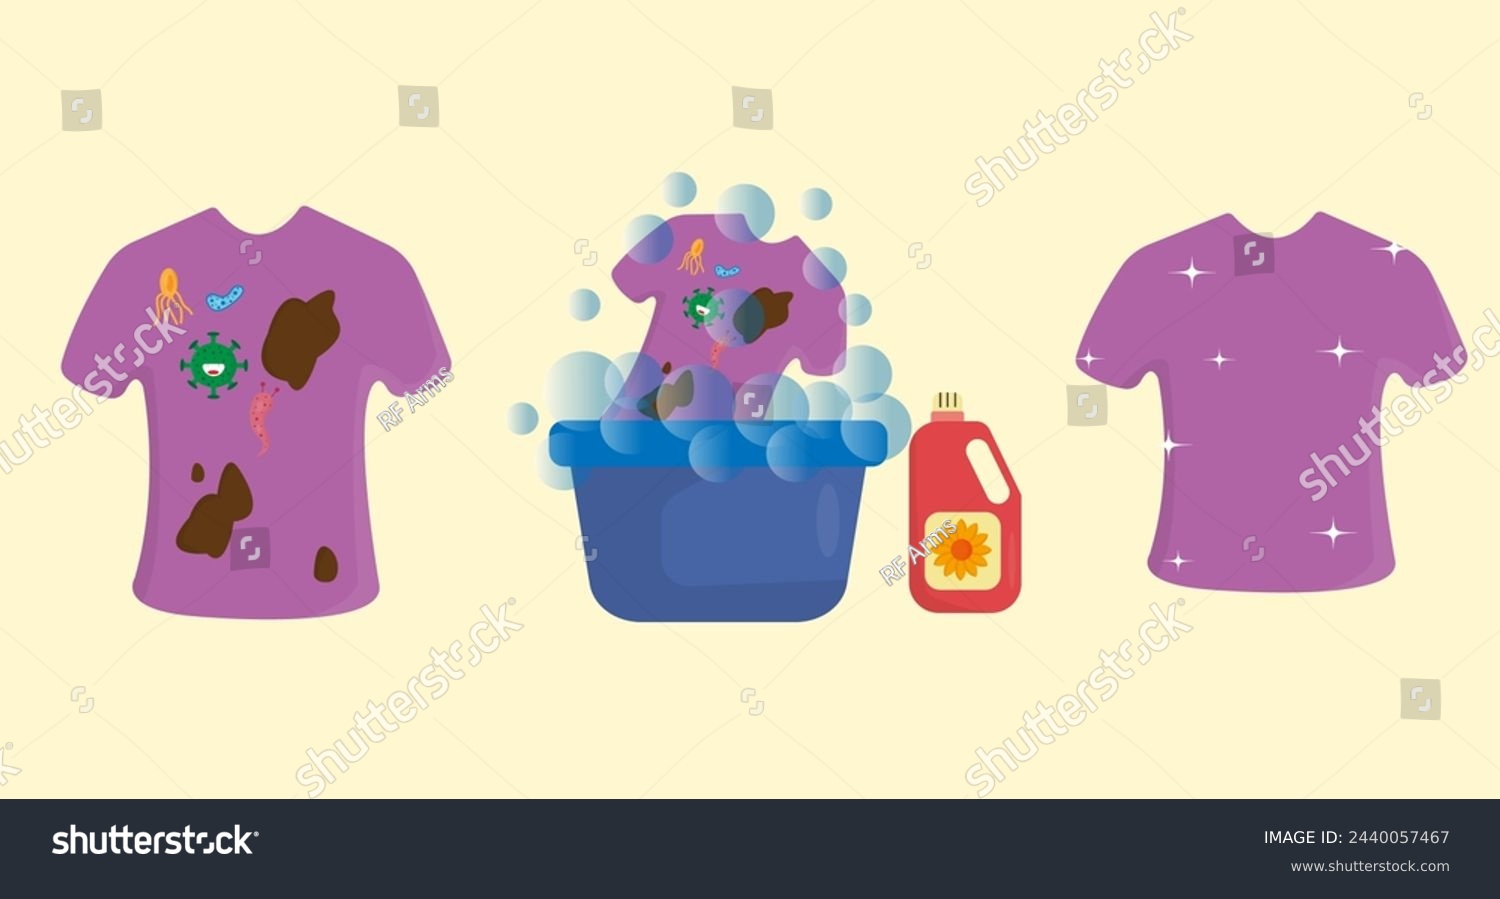 SVG of vector, laundry, wash, clean, clothes, detergent, icon, water, symbol, machine, illustration, clothing, dry, washer, fabric, set, design, sign, shirt, line, dryer, hand, service, softener, care, house svg